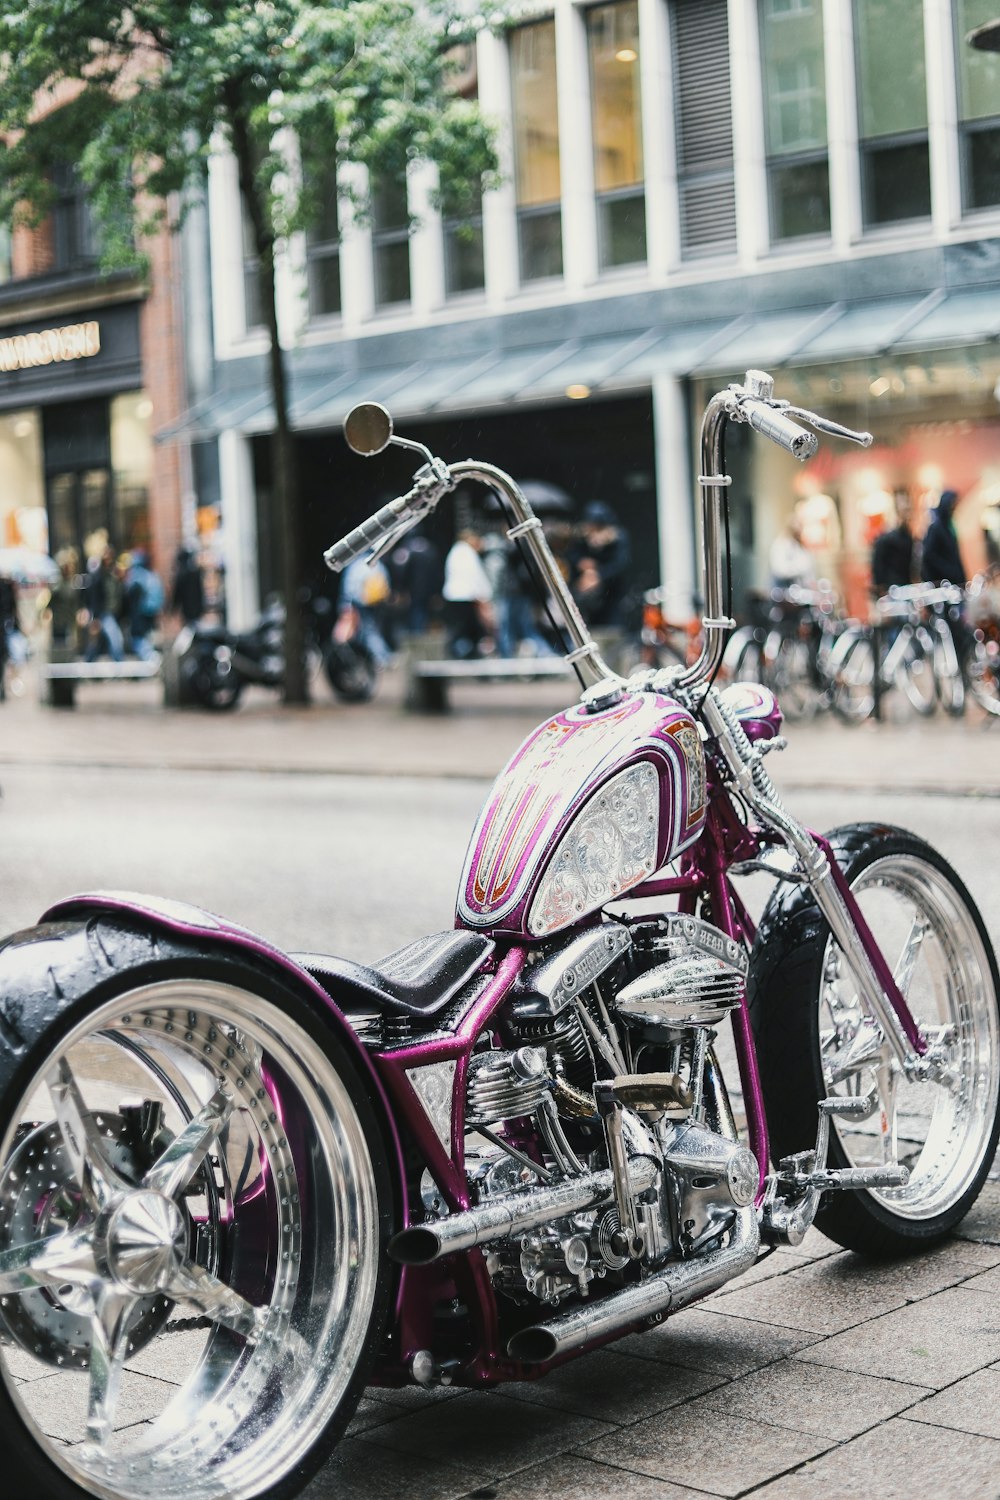 a purple motorcycle parked on the side of a street